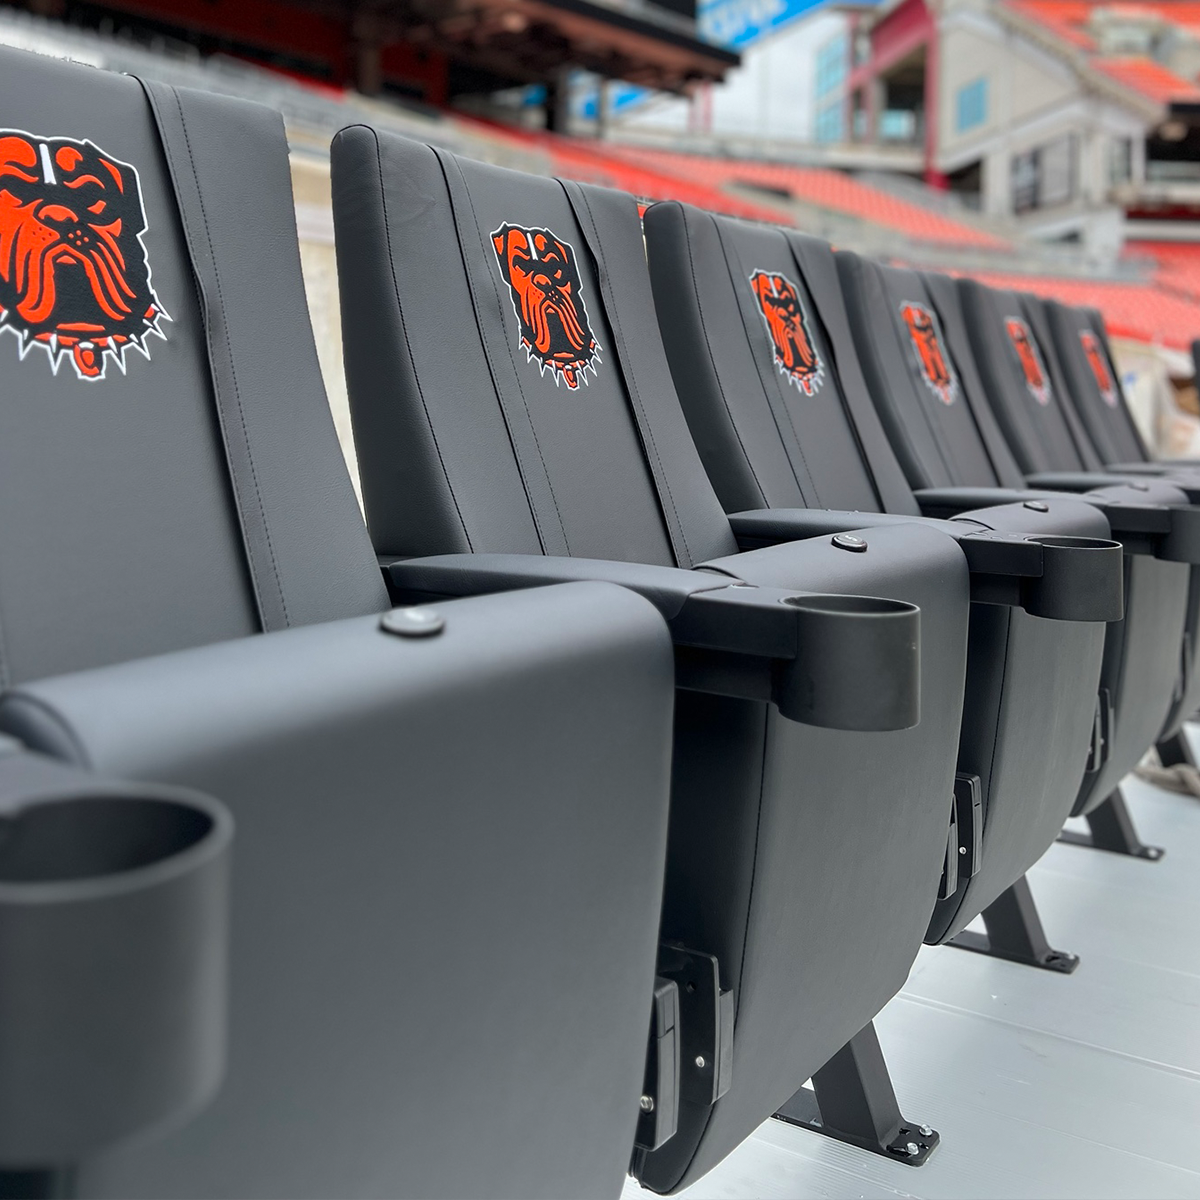 SuiteMax 3.5 VIP Seats with Central Michigan Secondary